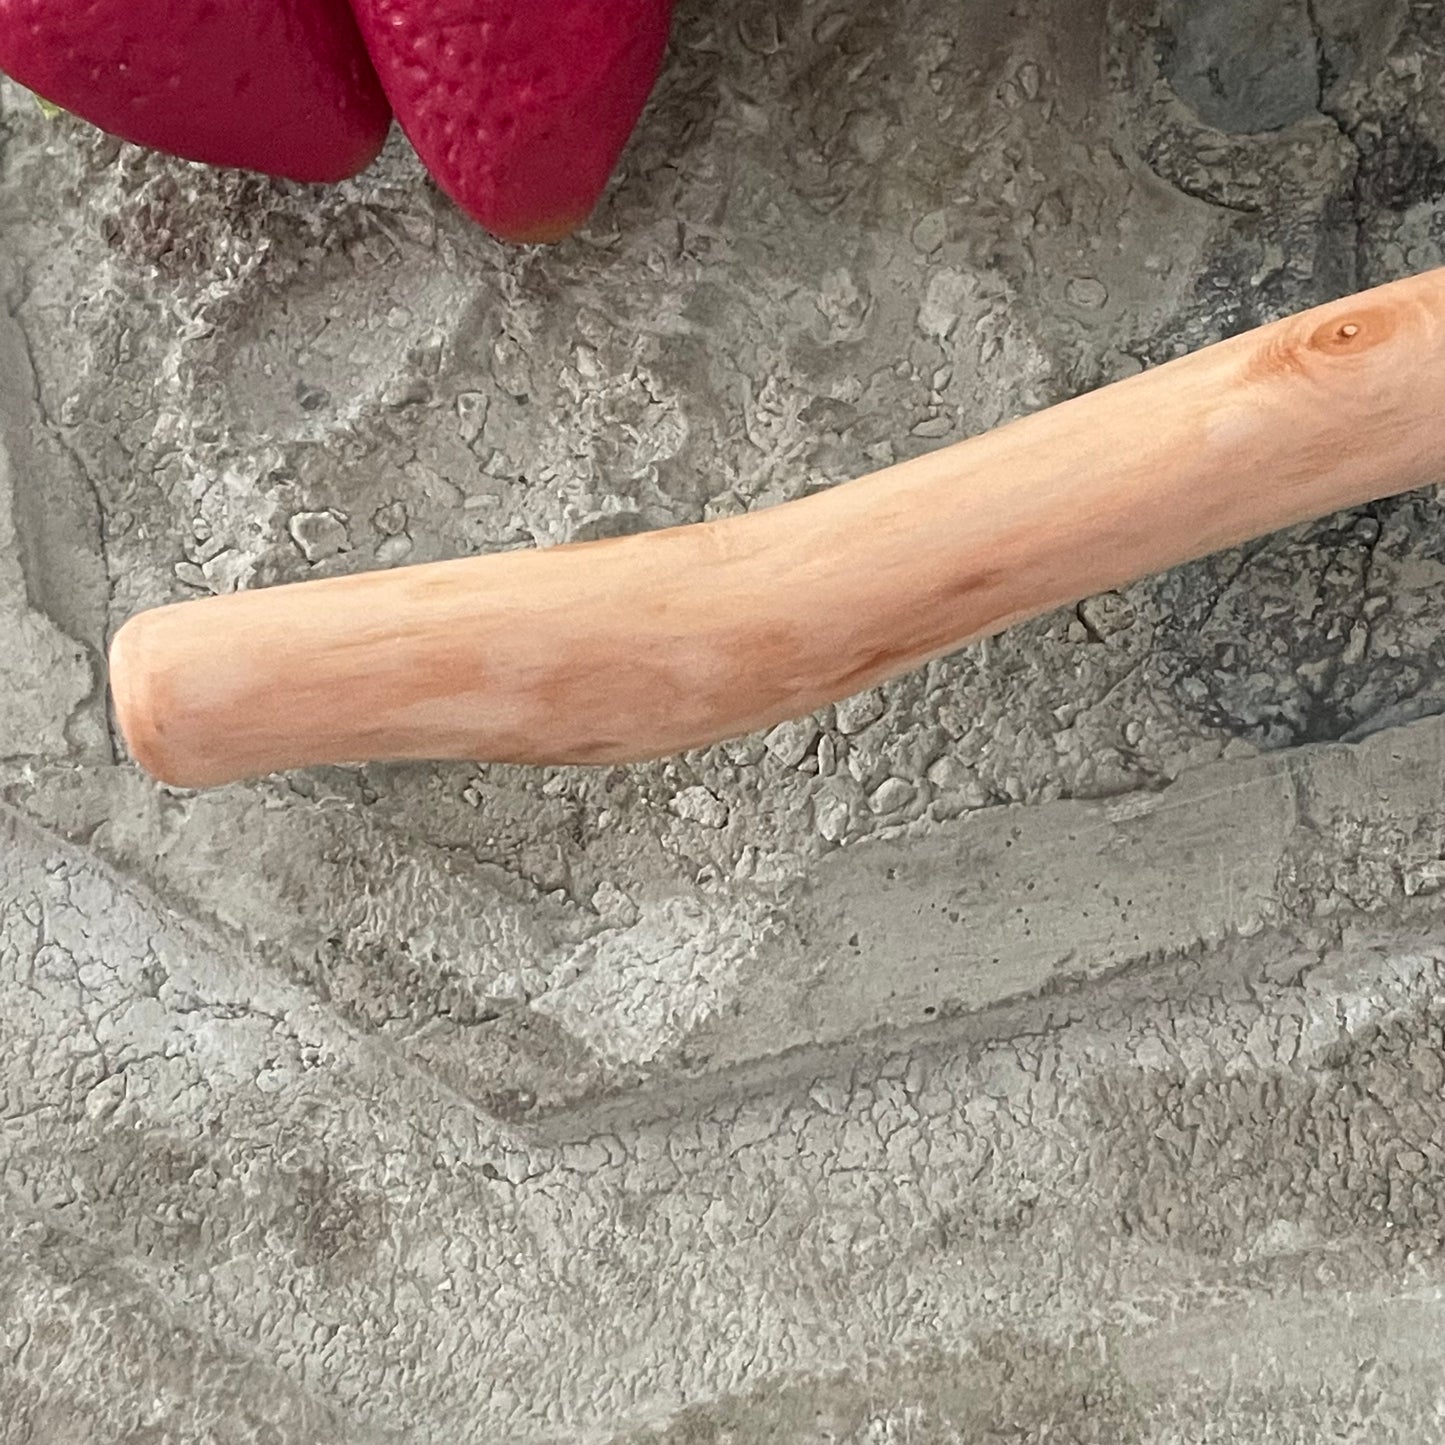 Rustic Rounded Handle Double End Scottish Spurtle Cherry 10" Reclaimed Wood Kitchen Utensil Handmade Hot Drinks Oatmeal Grits